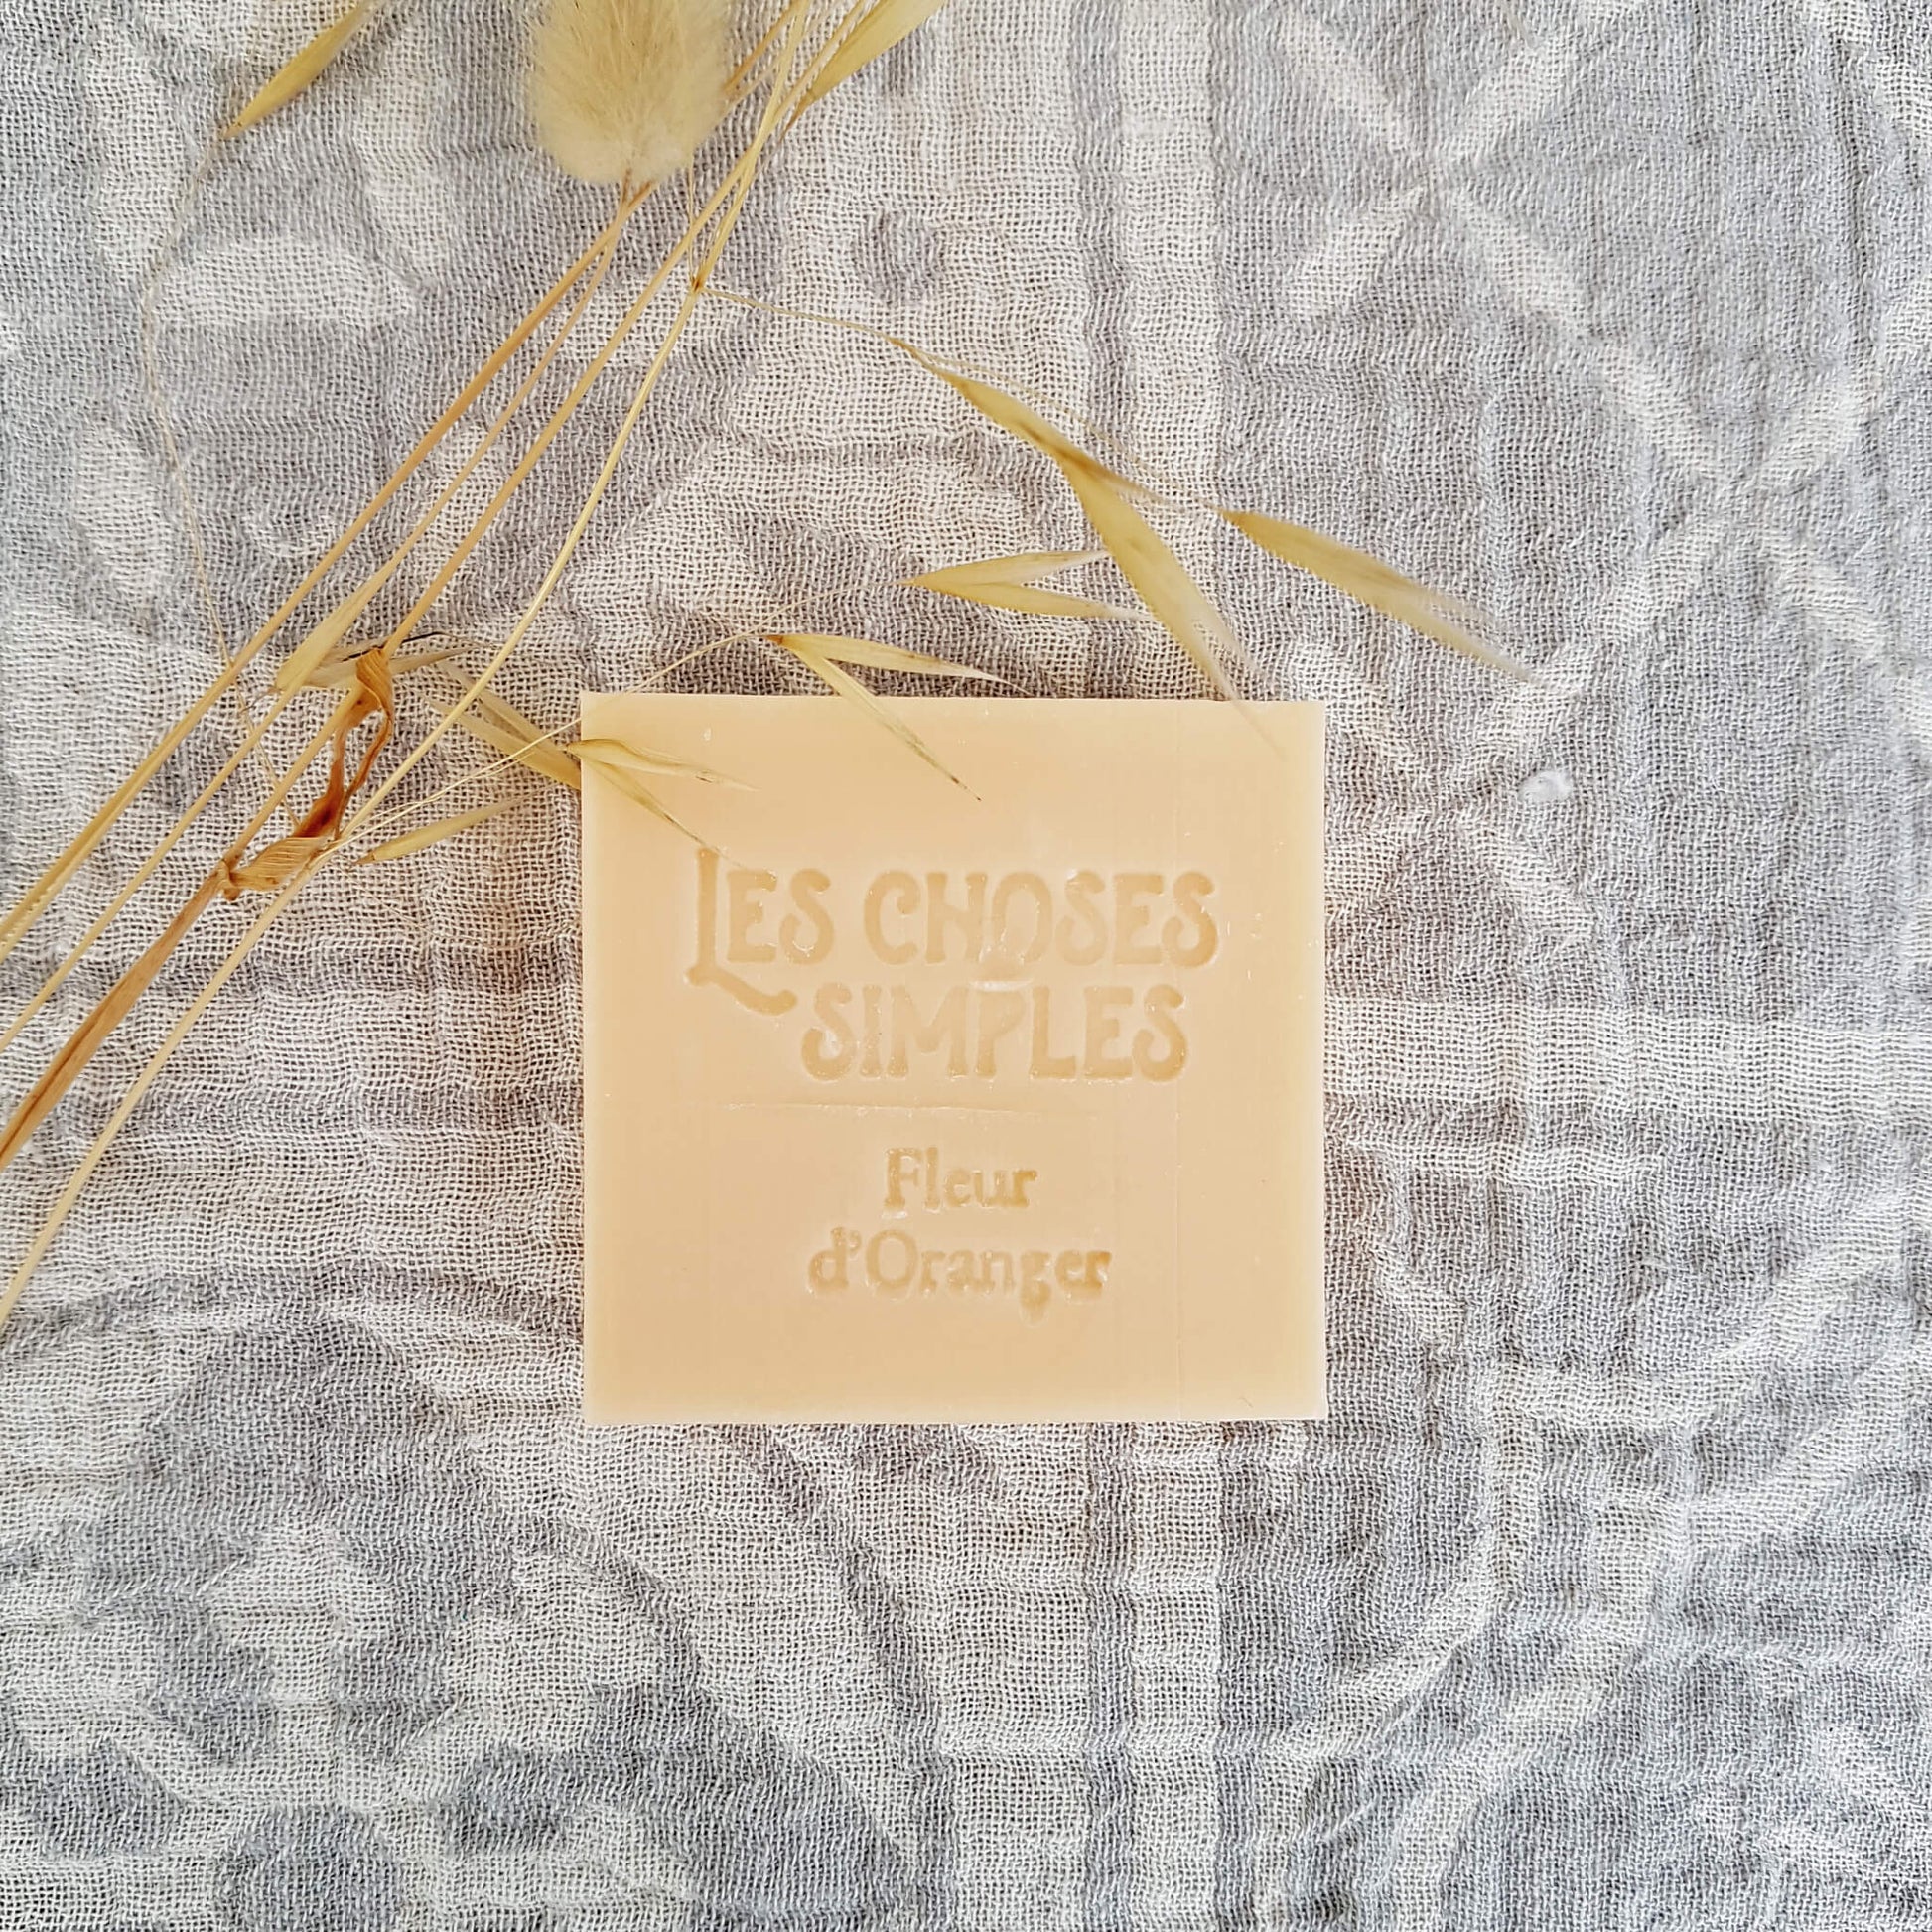 Orange Blossom Soap with Olive oil and Coconut oil - Unik by Nature